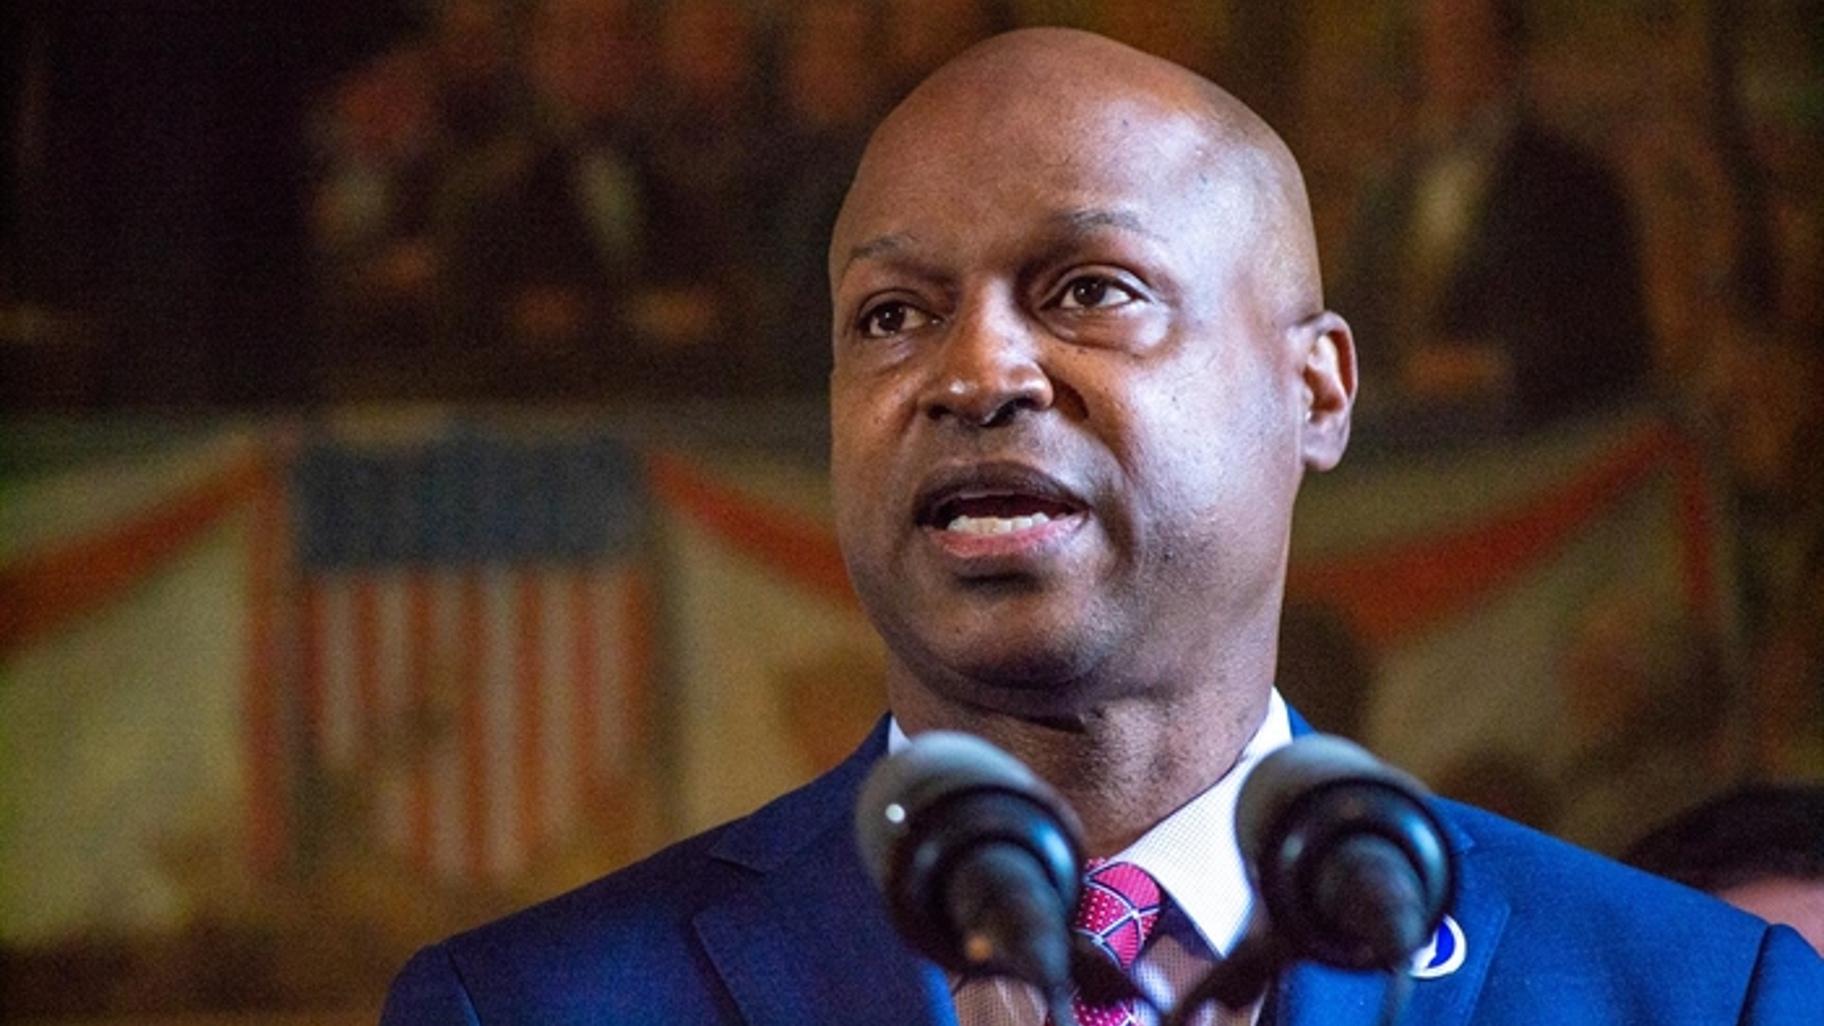 House Speaker Emanuel “Chris” Welch, D-Hillside, is pictured at a news conference in the governor’s office earlier this year. (Jerry Nowicki / Capitol News Illinois)